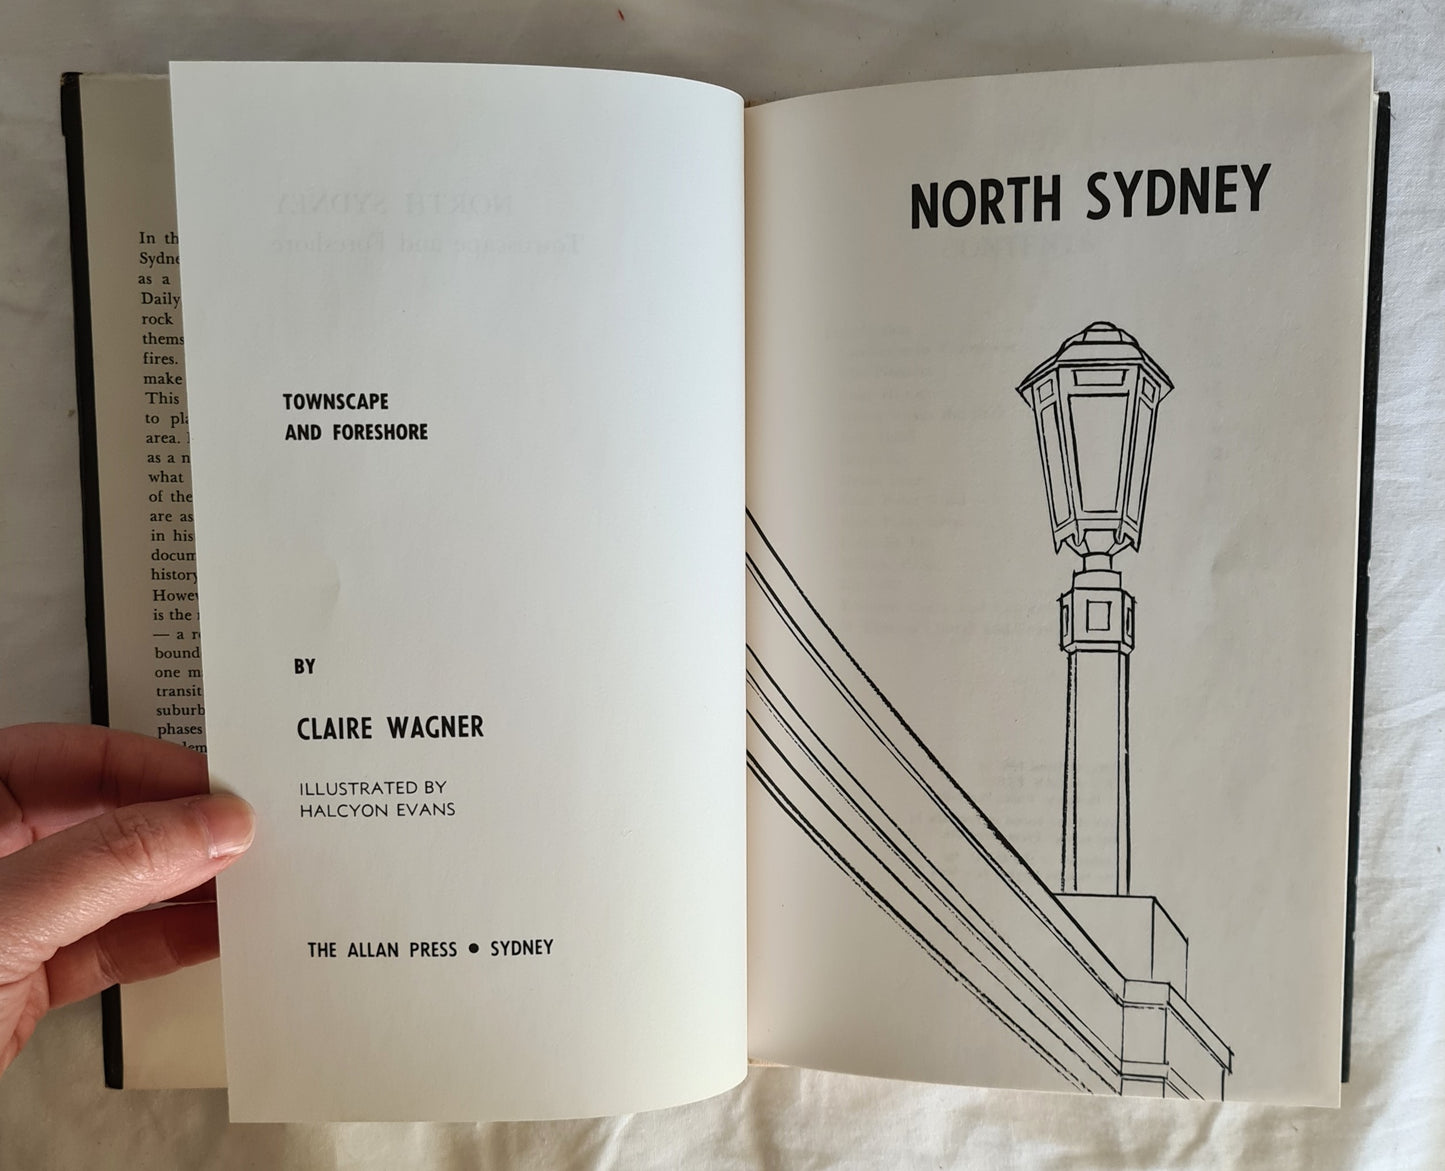 North Sydney  Townscape and Foreshore  by Claire Wagner  Illustrated by Halcyon Evans